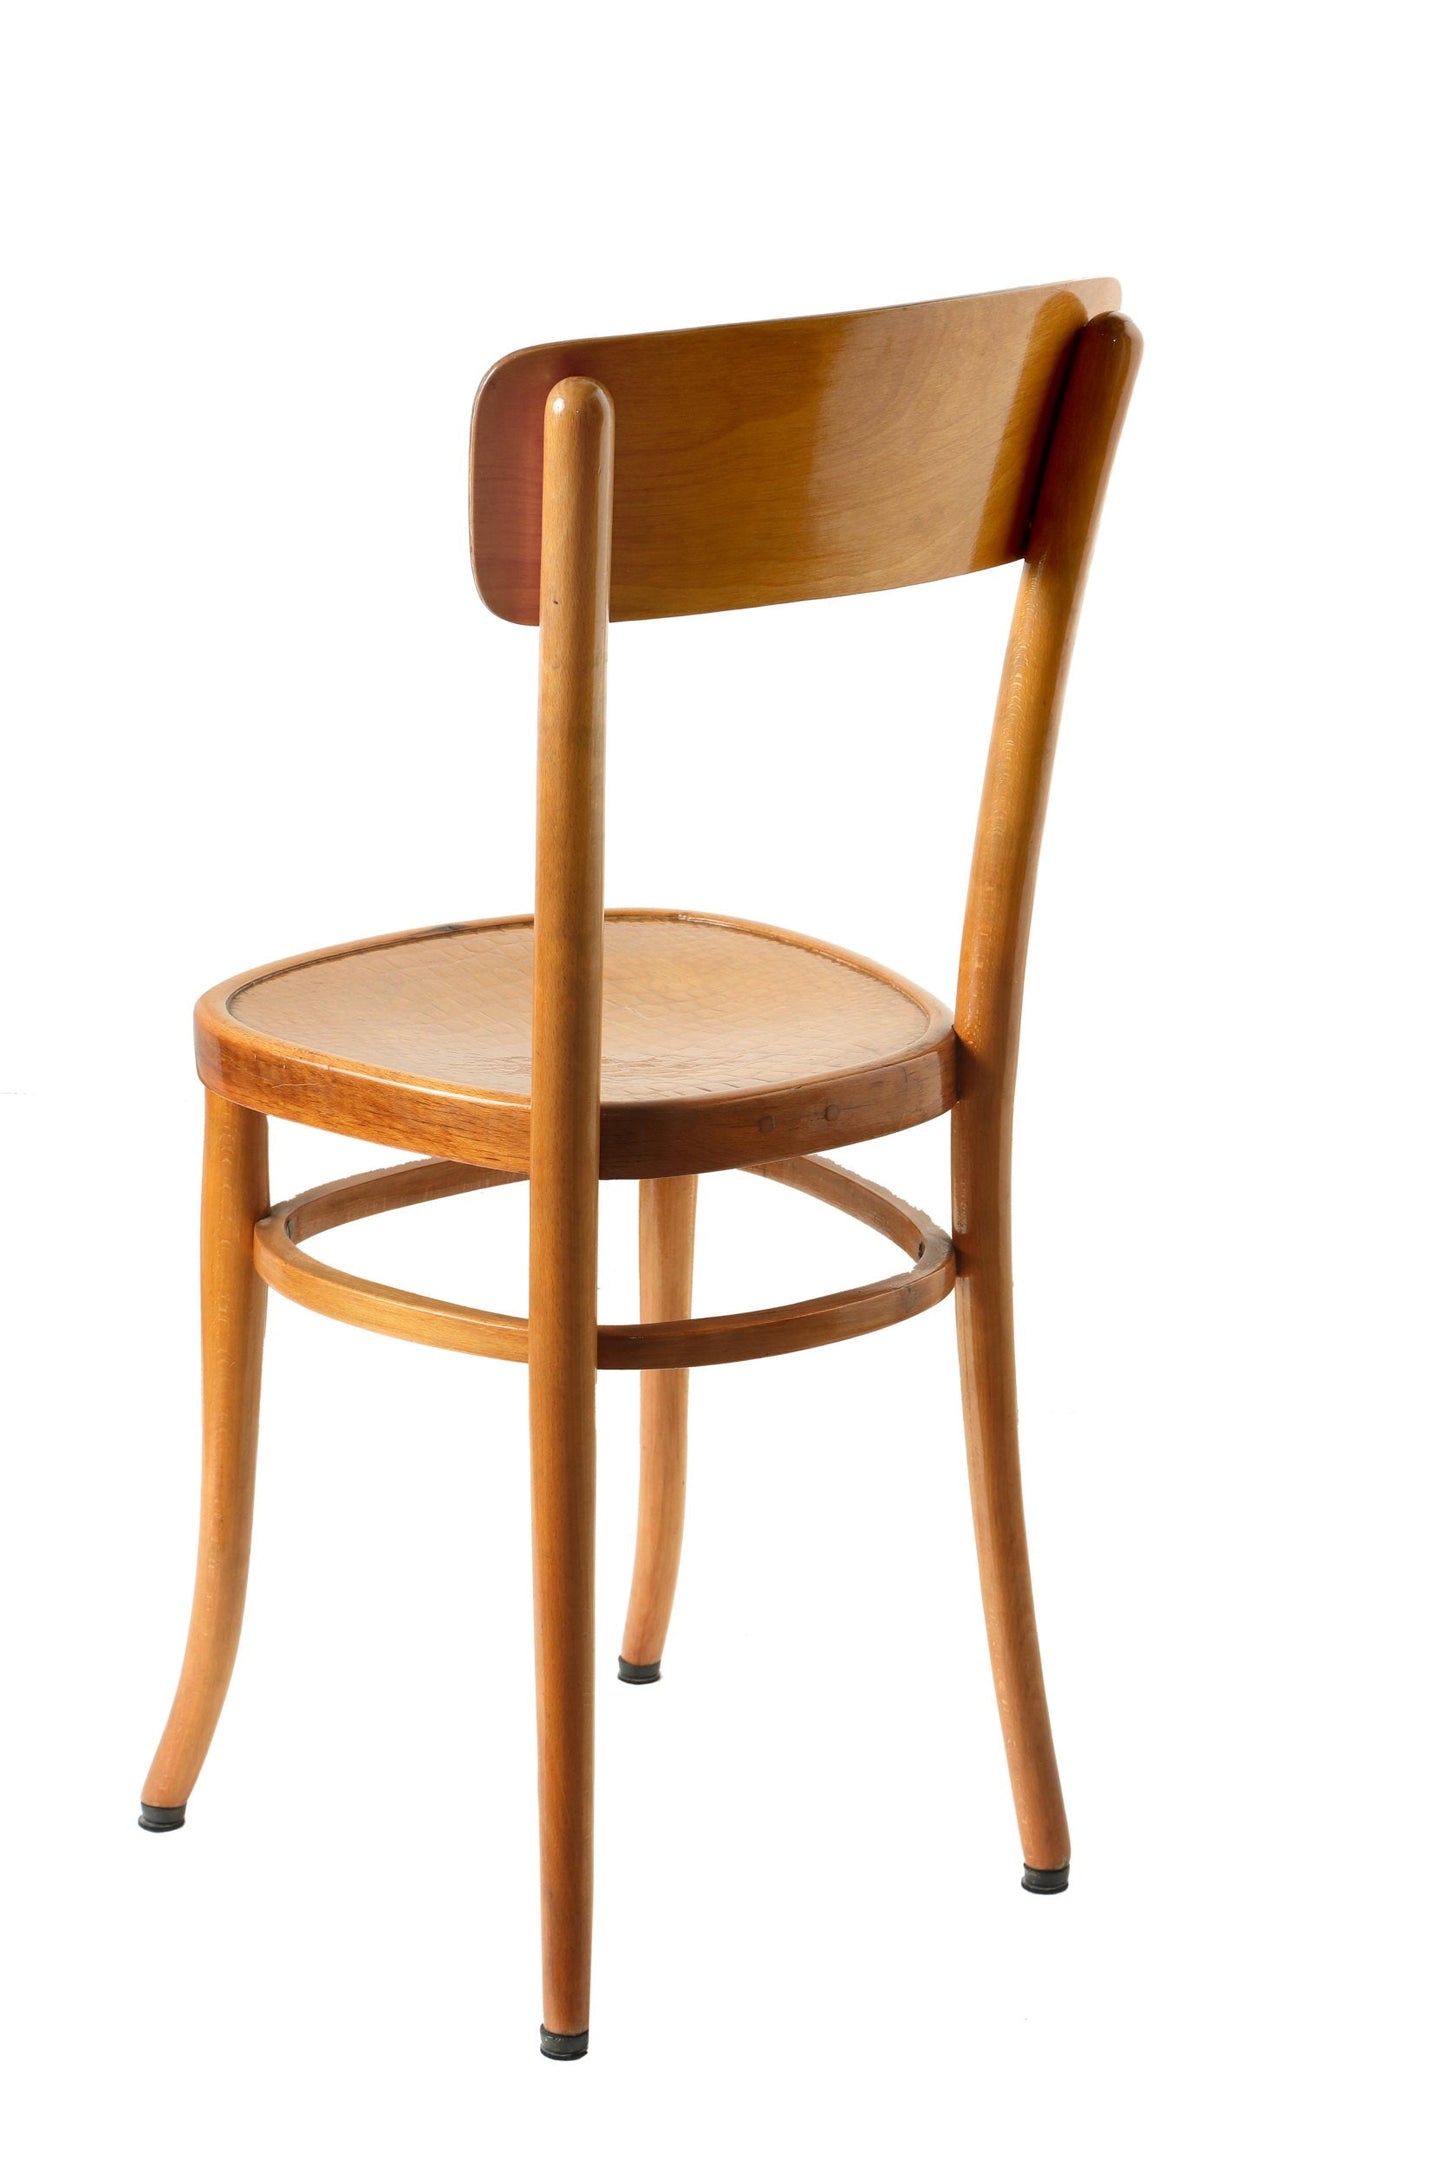 Four Antonio Volpe Udine chairs from the 1940s